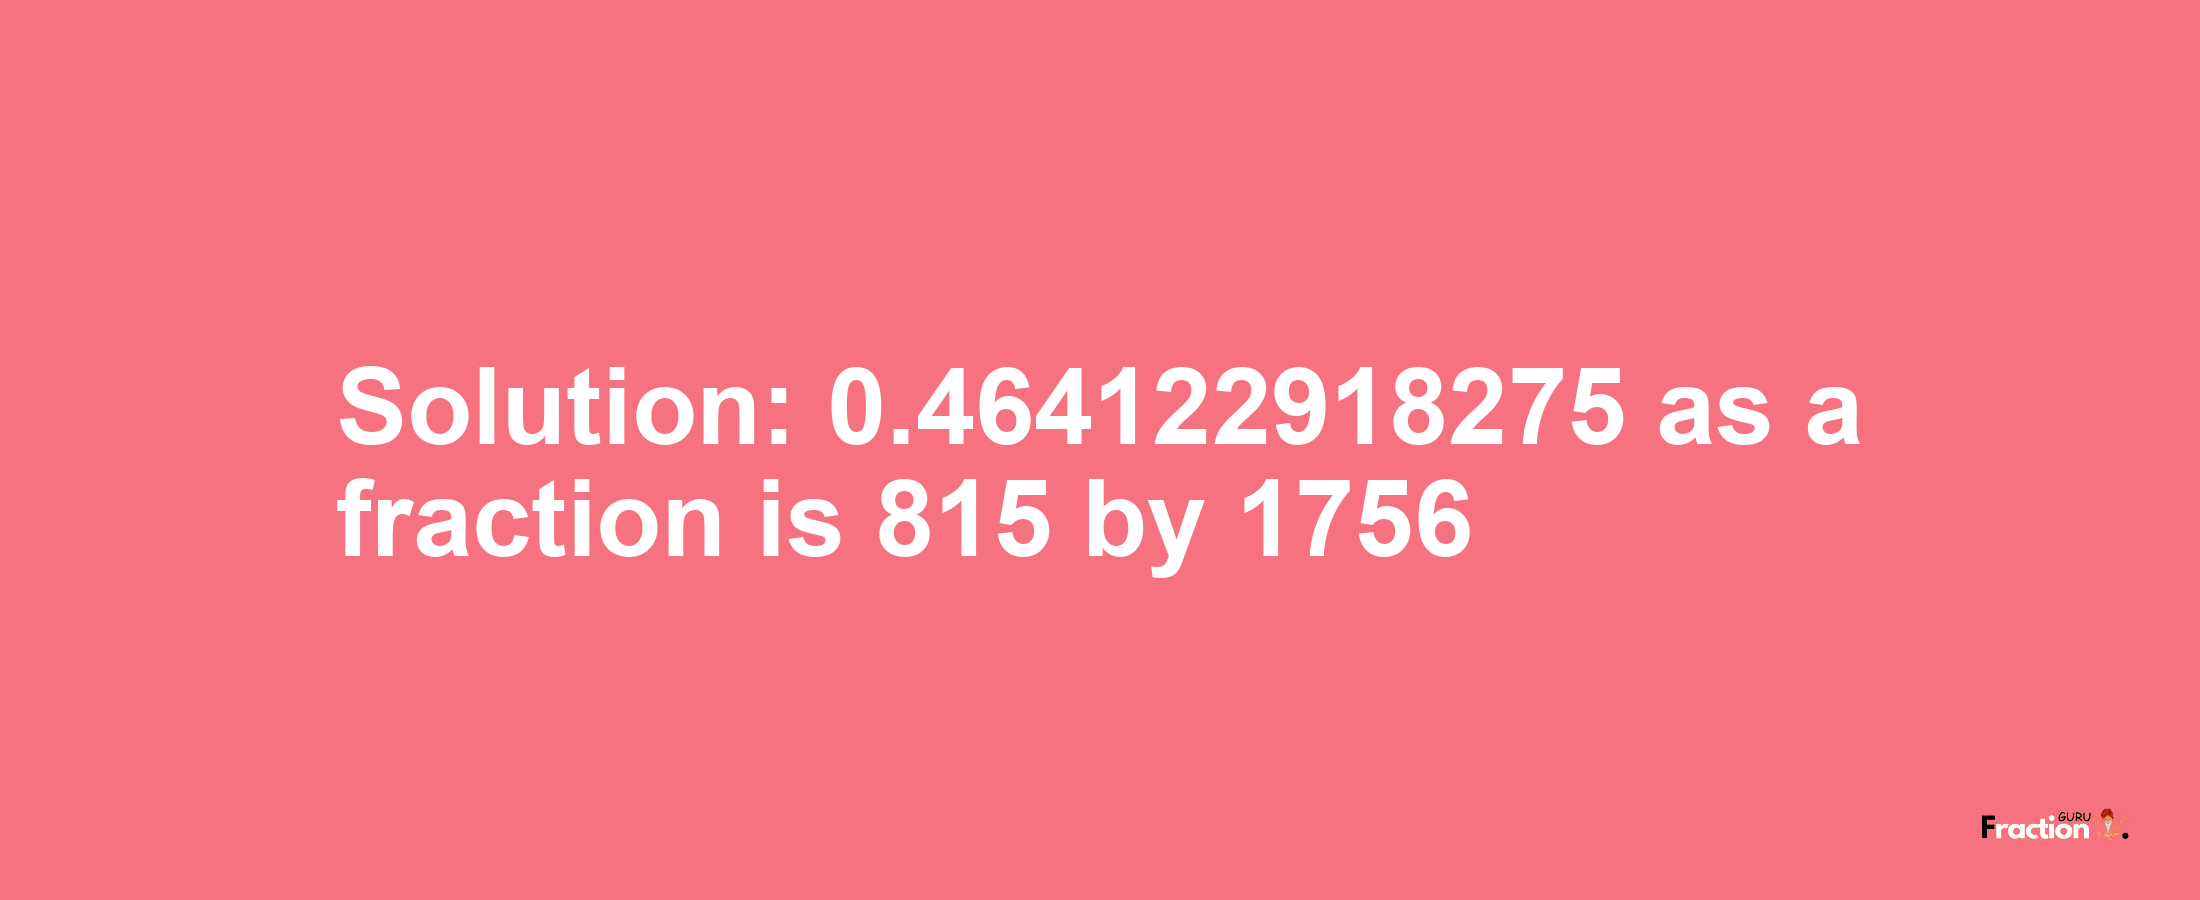 Solution:0.464122918275 as a fraction is 815/1756